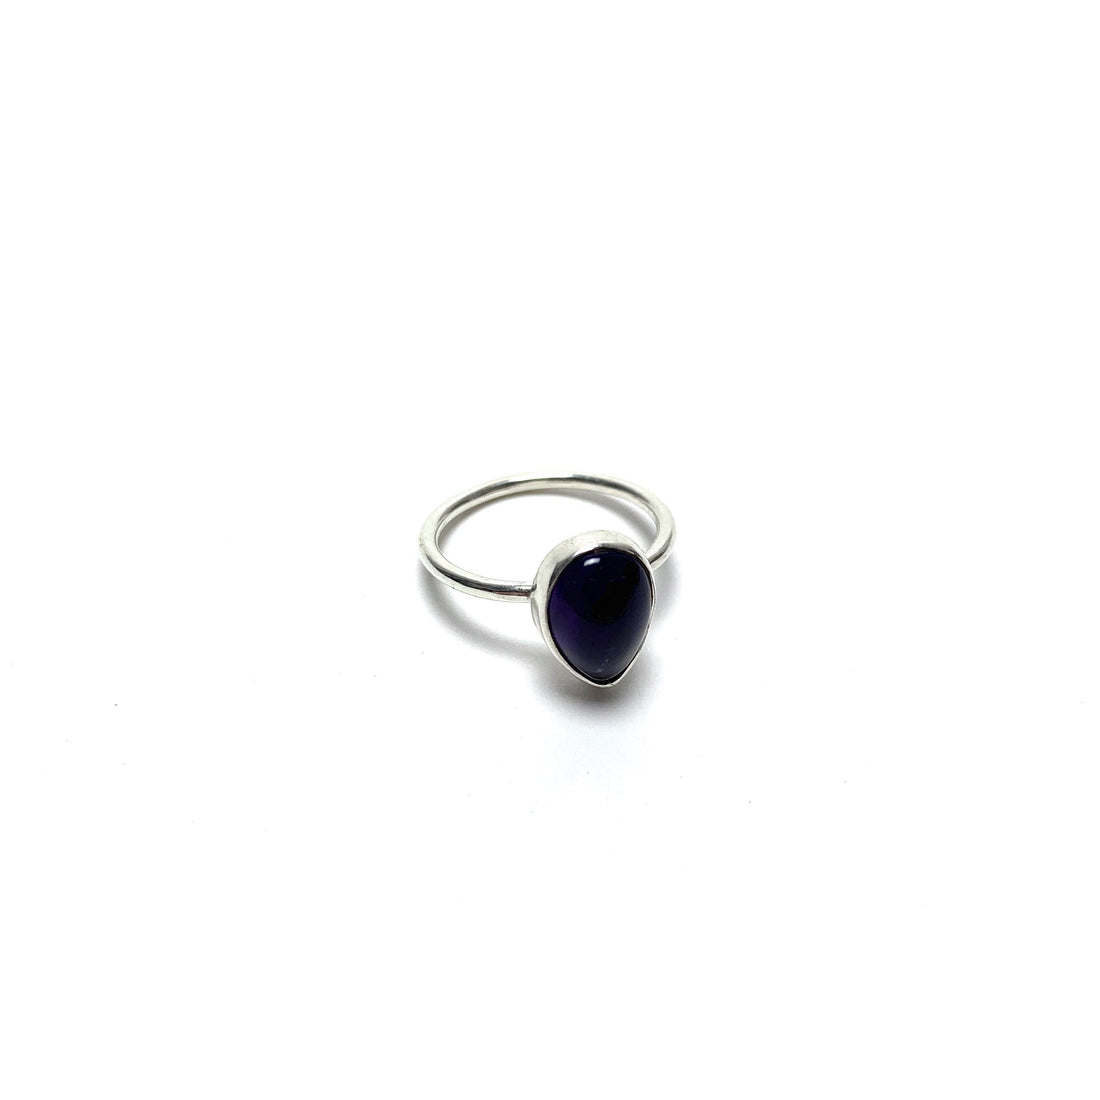 Amethyst Silver Ring Rings Crystals E. $18.00 Size 6.5 